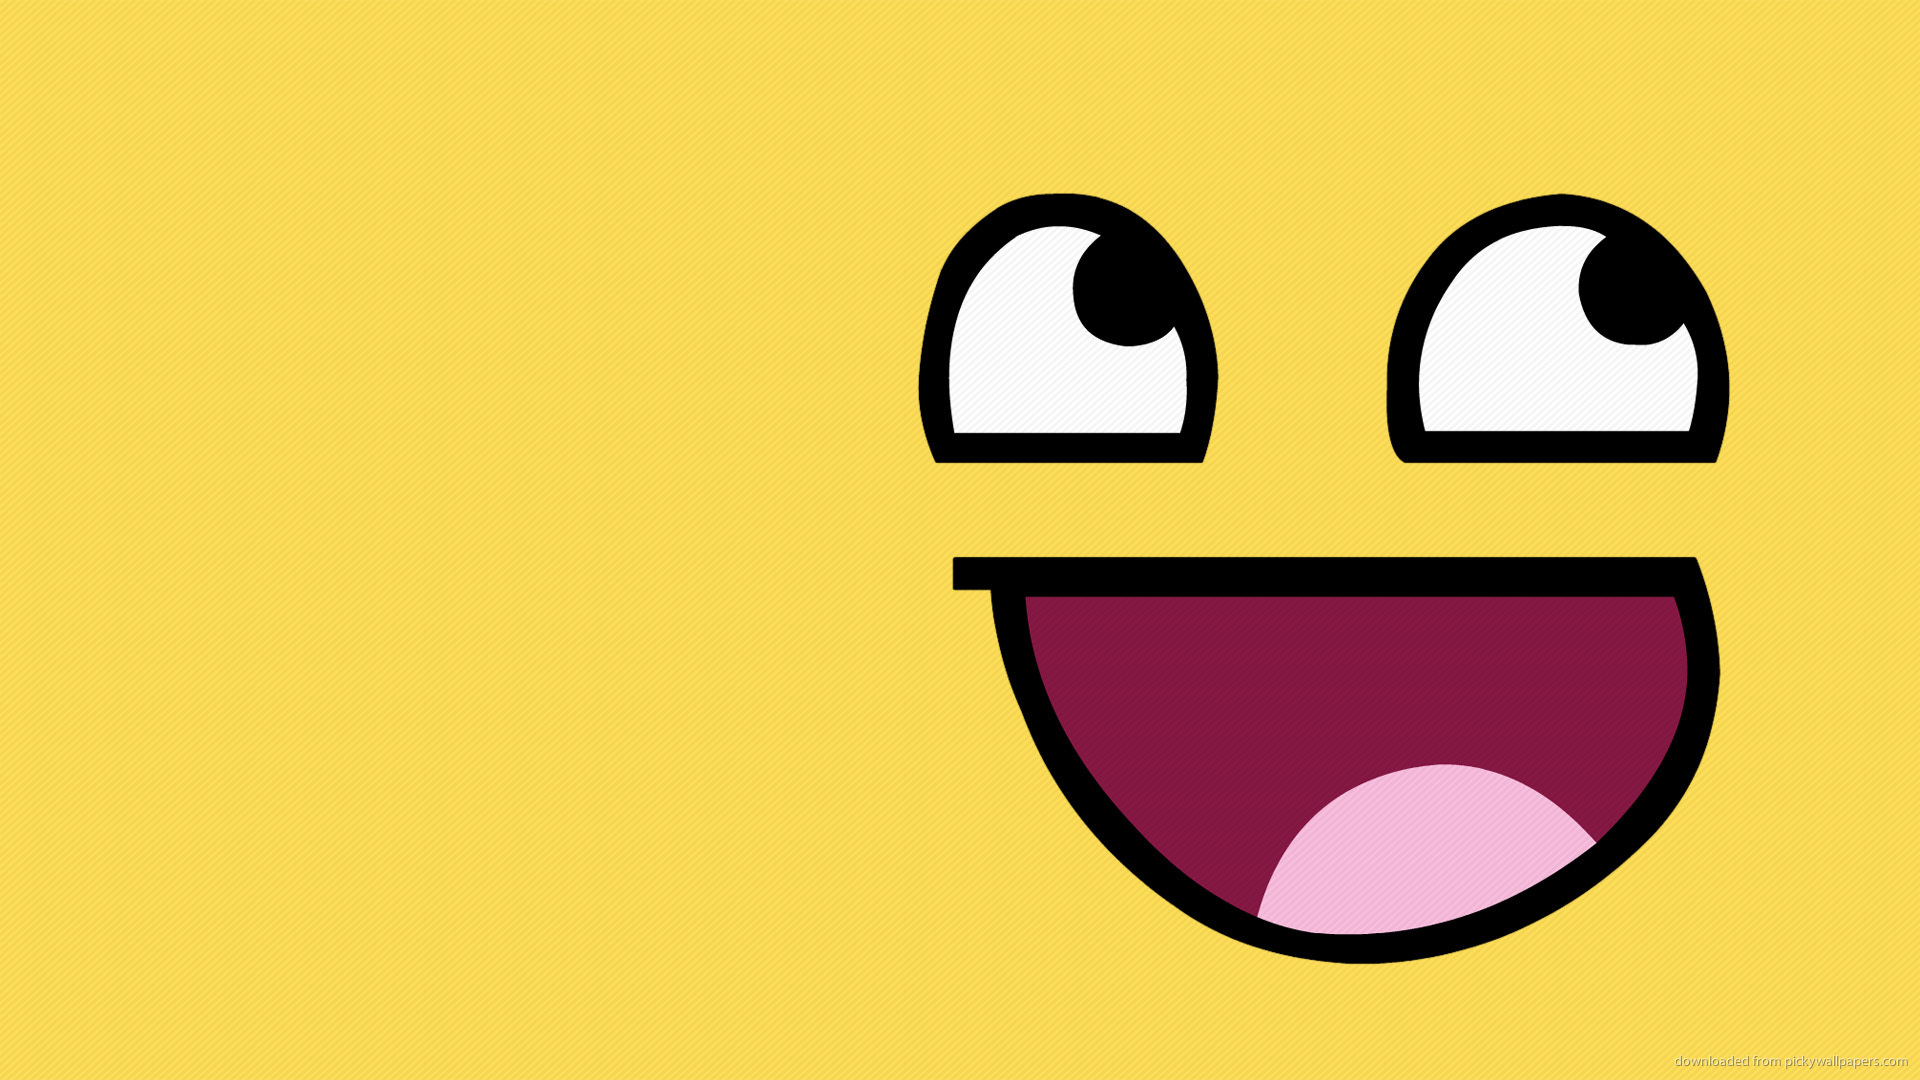 Memes Wallpaper Giant Smiley Awesome Miscellaneous